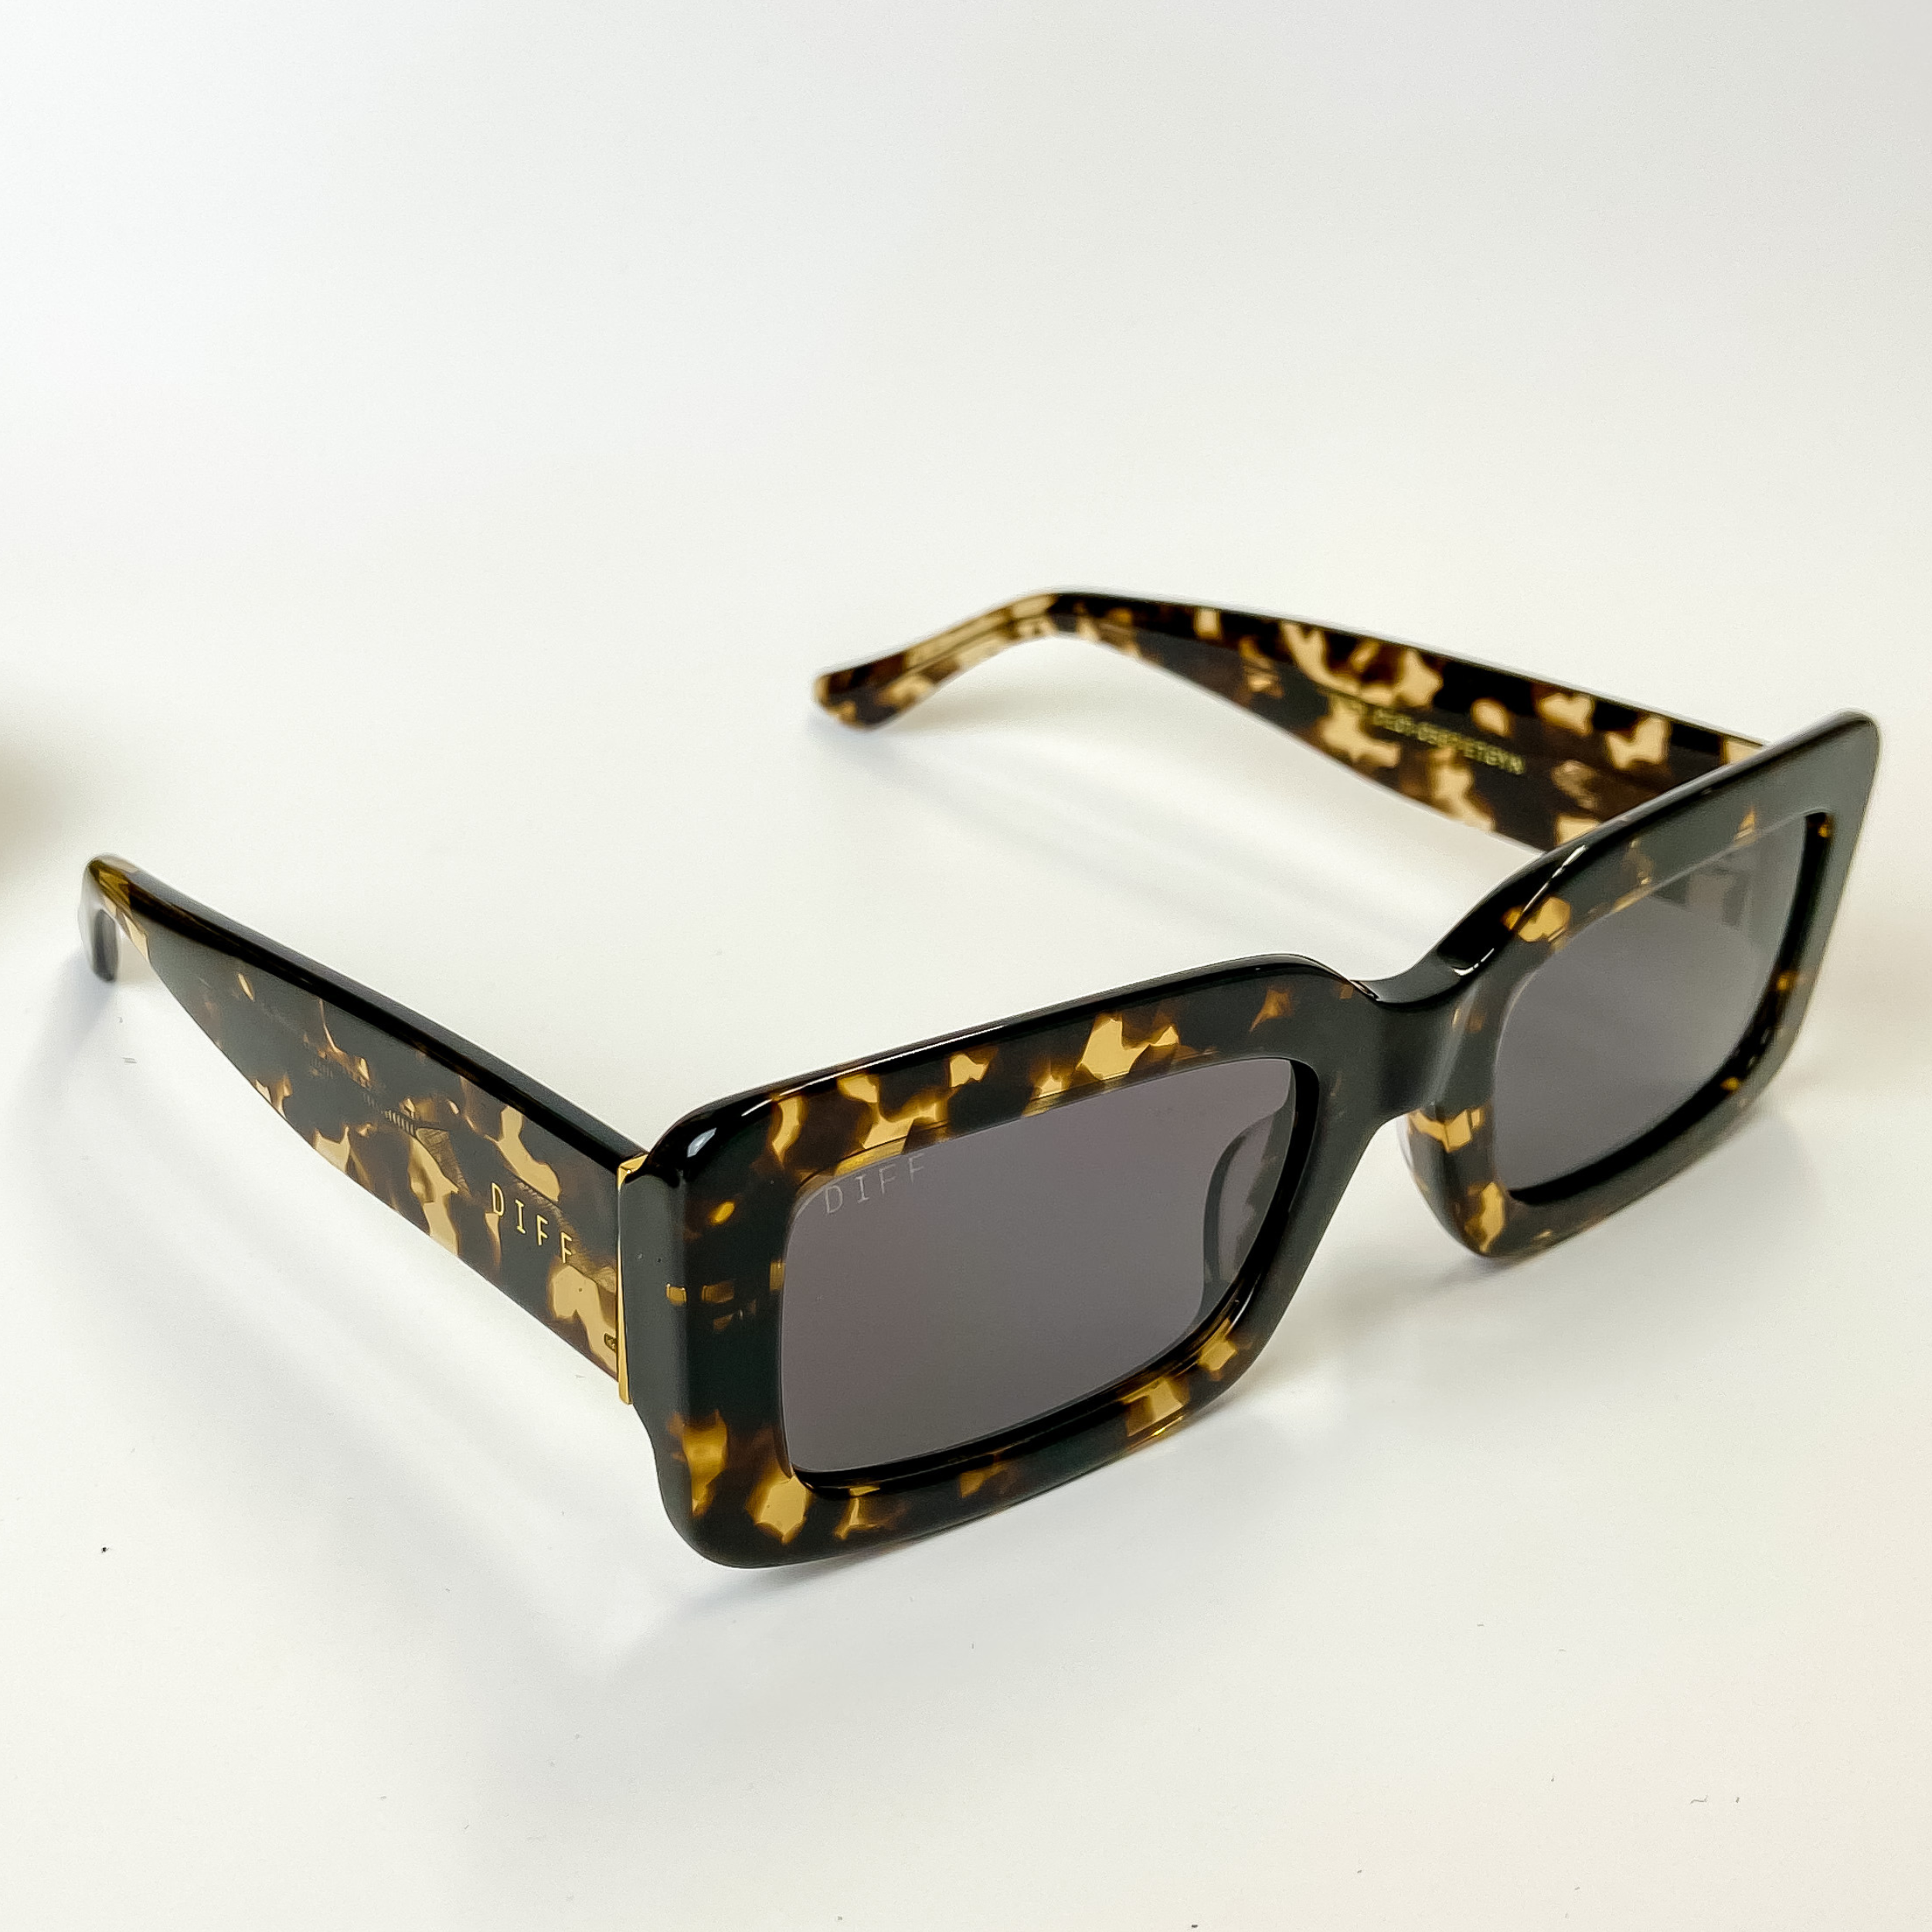 A pair of brown tortoise print frame sunglasses with grey lenses. These sunglasses are pictured on a white background.